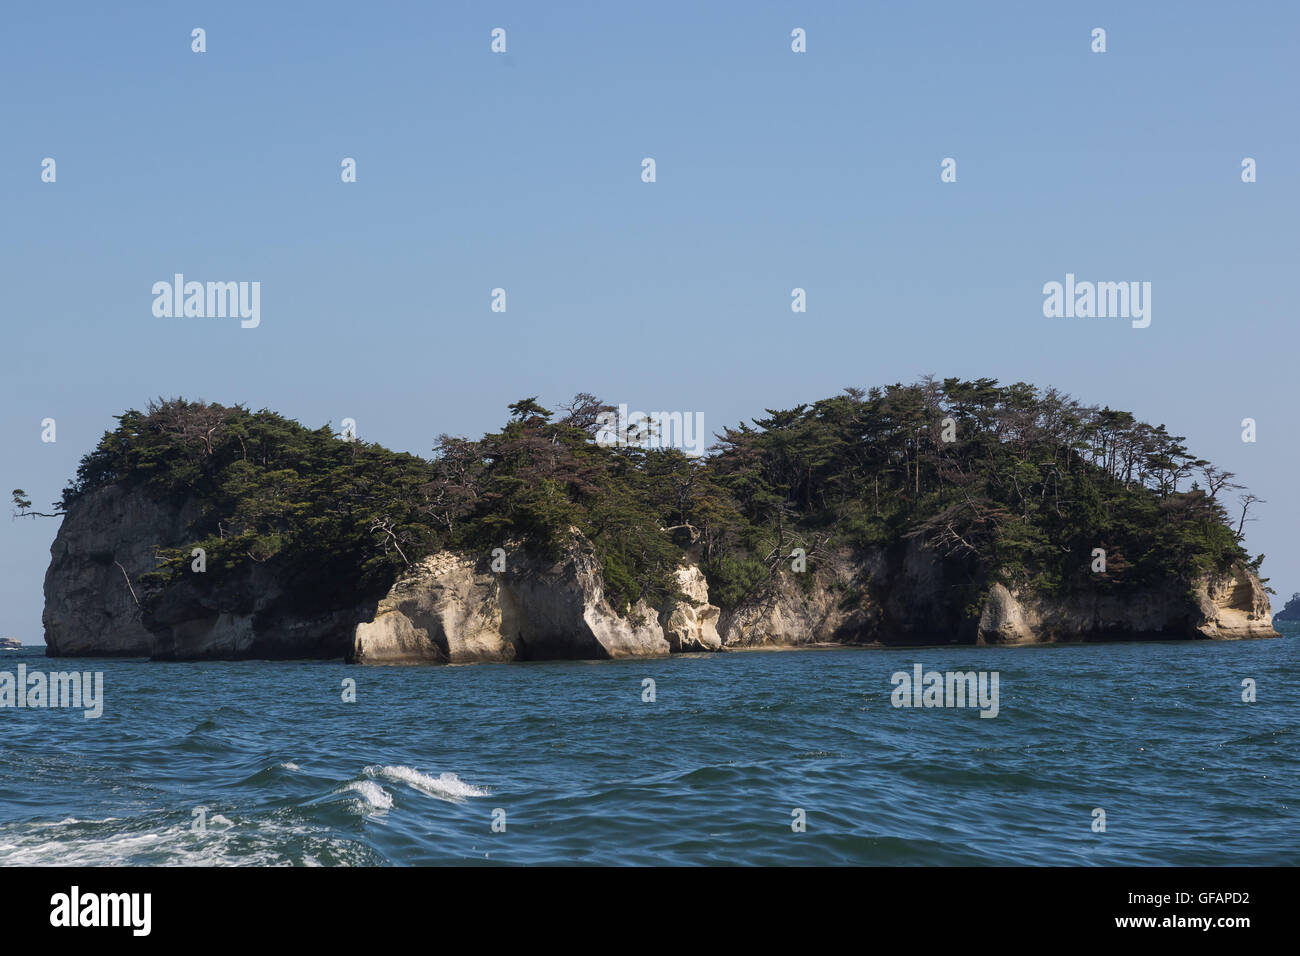 A general view of Matsushima Bay seen from a boat as part of the ''1000km Relay to Tokyo 2016'' promotion event in Matsushima on July 30, 2016, Miyagi, Japan. There are about 260 small islands in the bay, whose name means Pine Islands. At the time of the March 2011 earthquake and tsunami the islands served as a natural barrier weakening the impact of the tsunami on the coastal town. Matsushima is one of the most popular spots to visit for tourists in the region. © Rodrigo Reyes Marin/AFLO/Alamy Live News Stock Photo